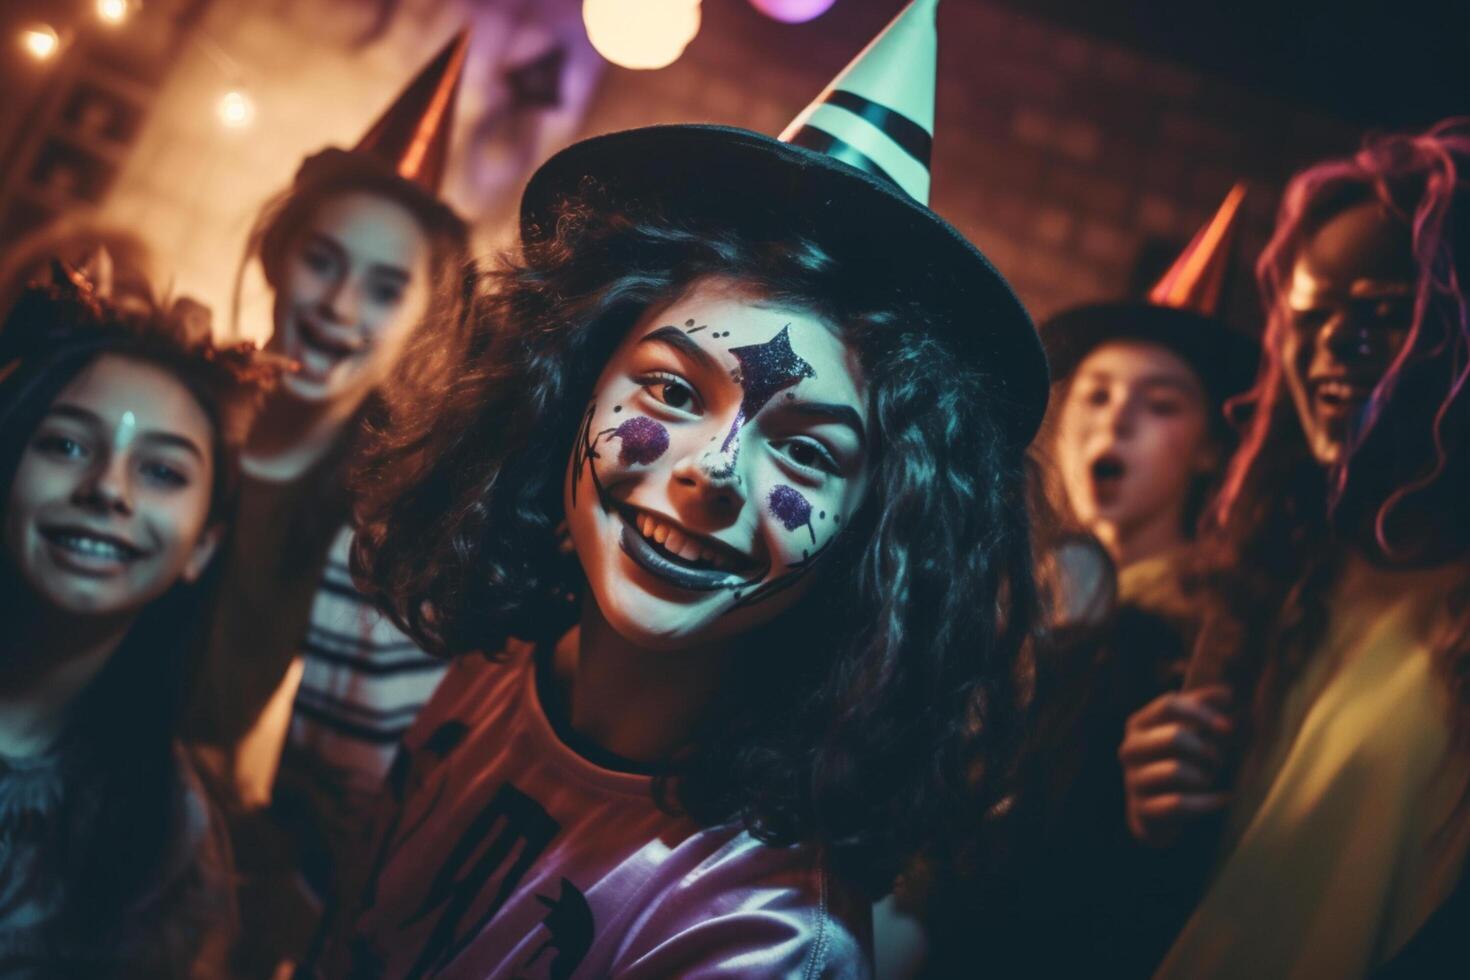 Teenagers friends in costumes celebrating and having fun at halloween party. Young people at costumes party halloween celebration concept by photo